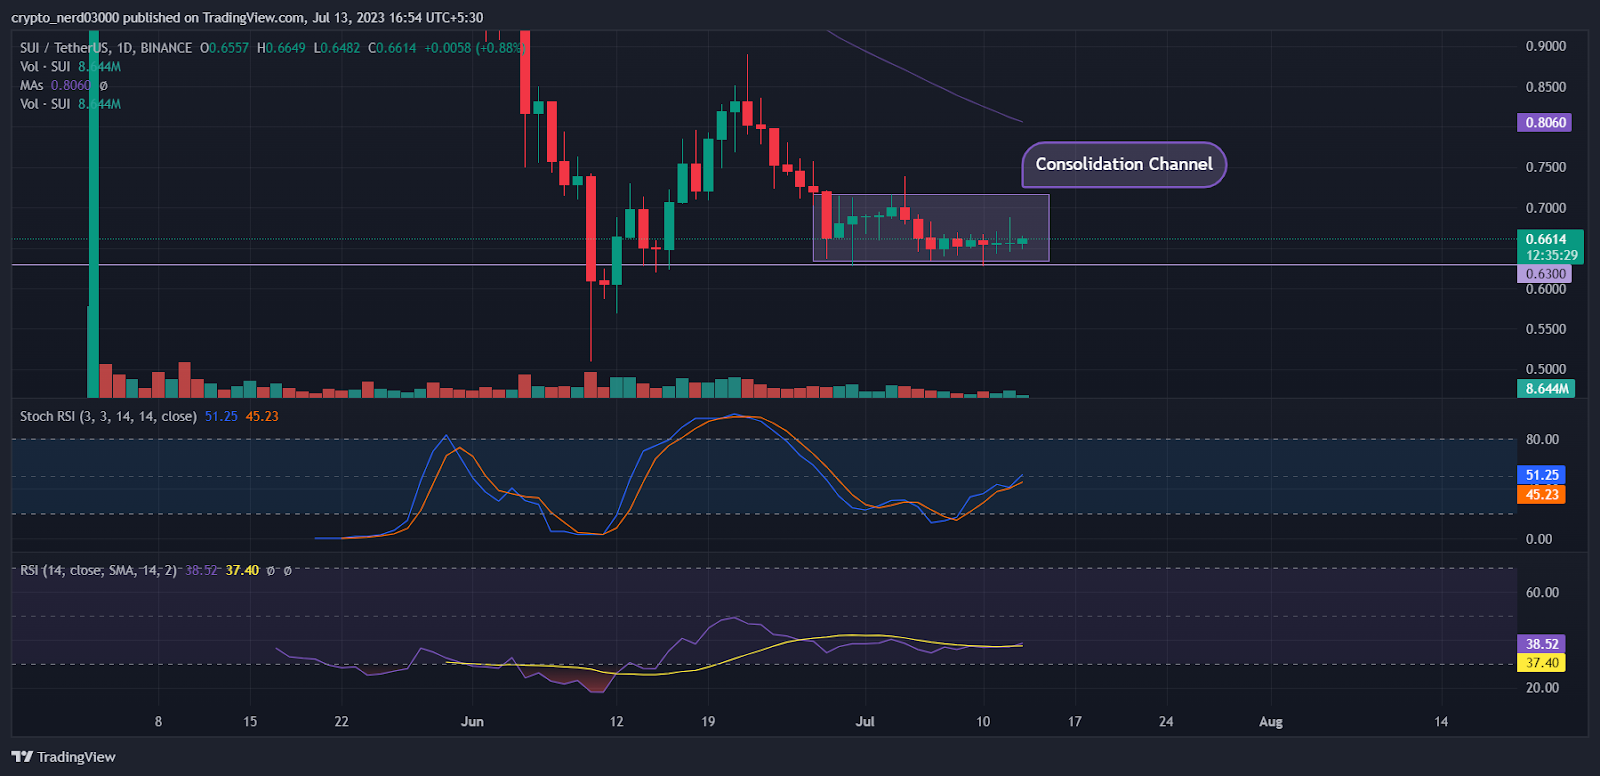 SUI Price Prediction: SUI Price Range Bound On Daily Chart?